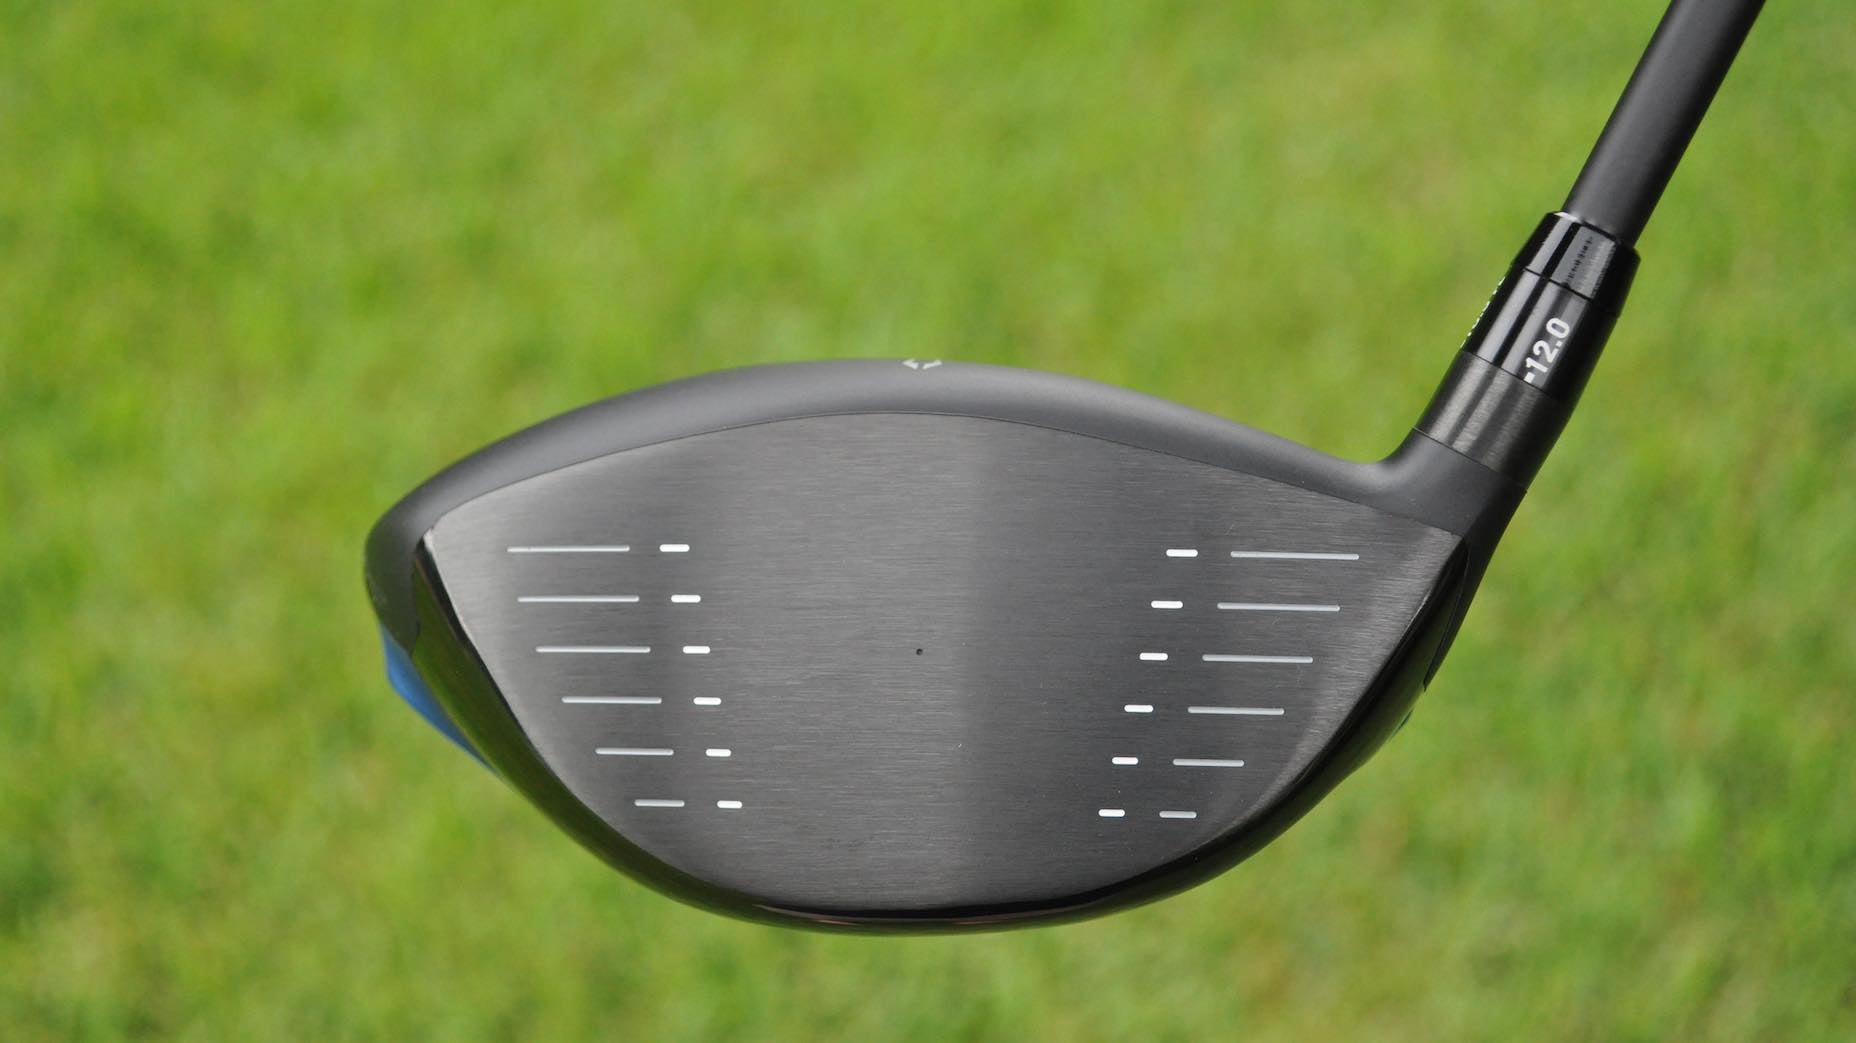 Cleveland Launcher XL driver aims to live up to namesake First Look